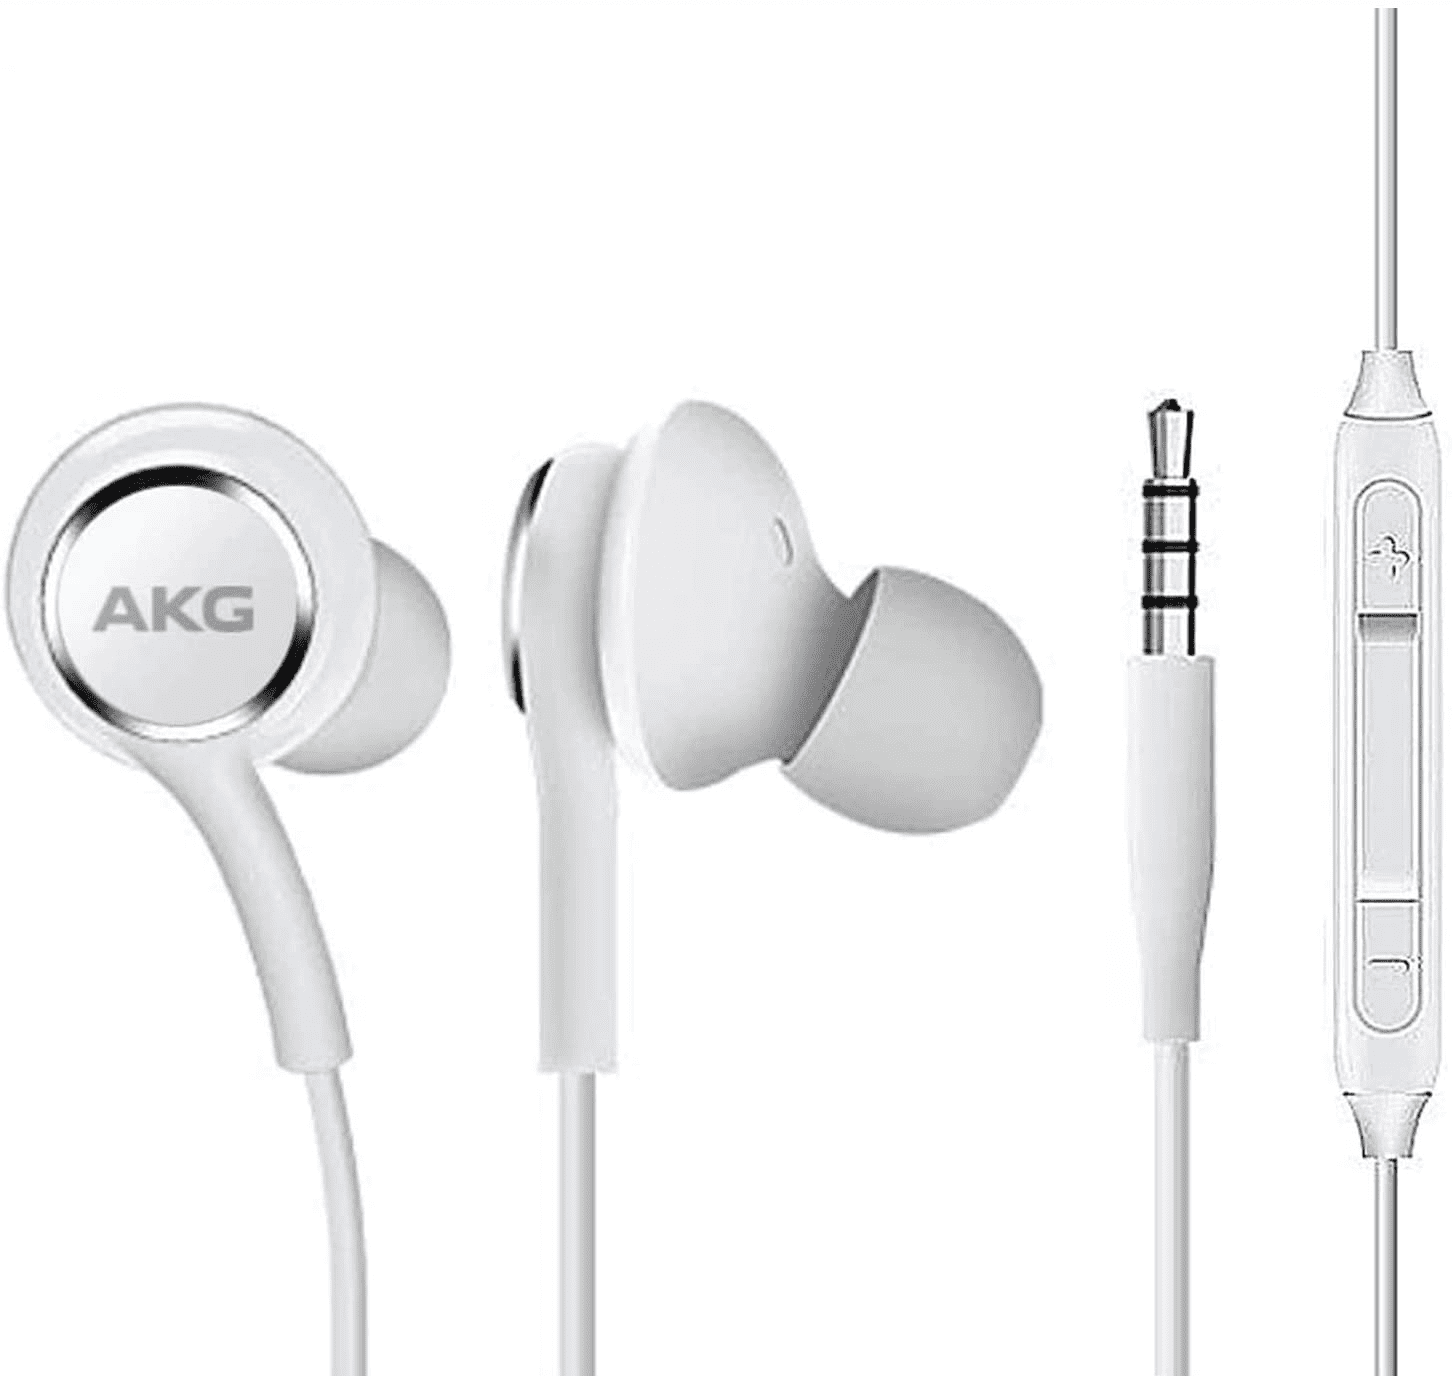 Oem Amazing Stereo Headphones For Samsung Galaxy J2 16 White Akg Tuned With Microphone Us Version With Warranty Us Version With Warranty Walmart Com Walmart Com